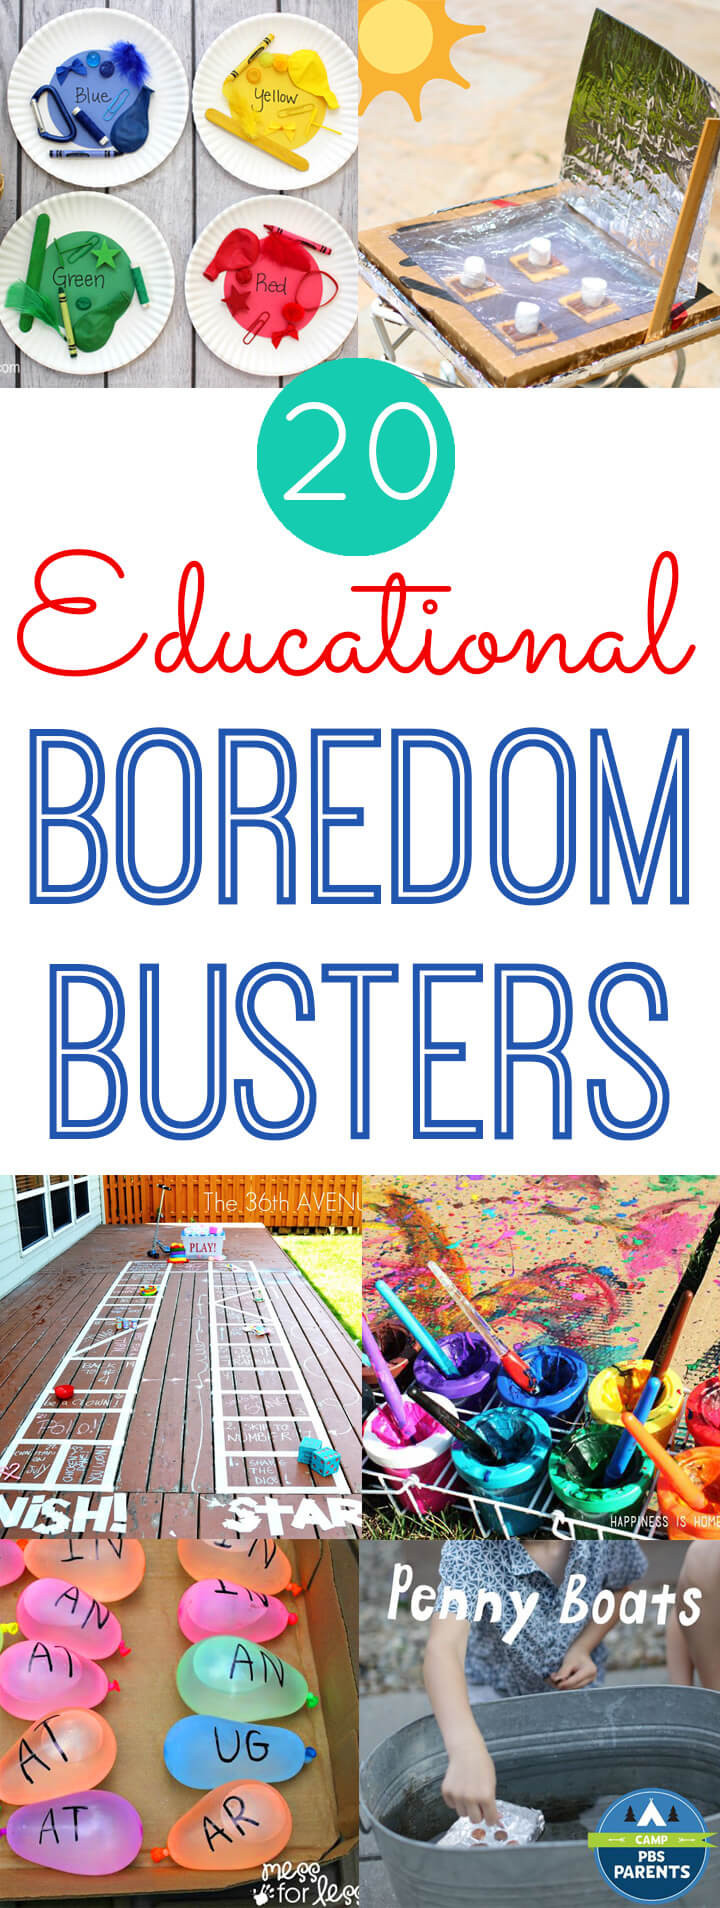 10 Year Old Boy Christmas Gift Ideas 2020
 20 Educational Summer Boredom Busters Happiness is Homemade